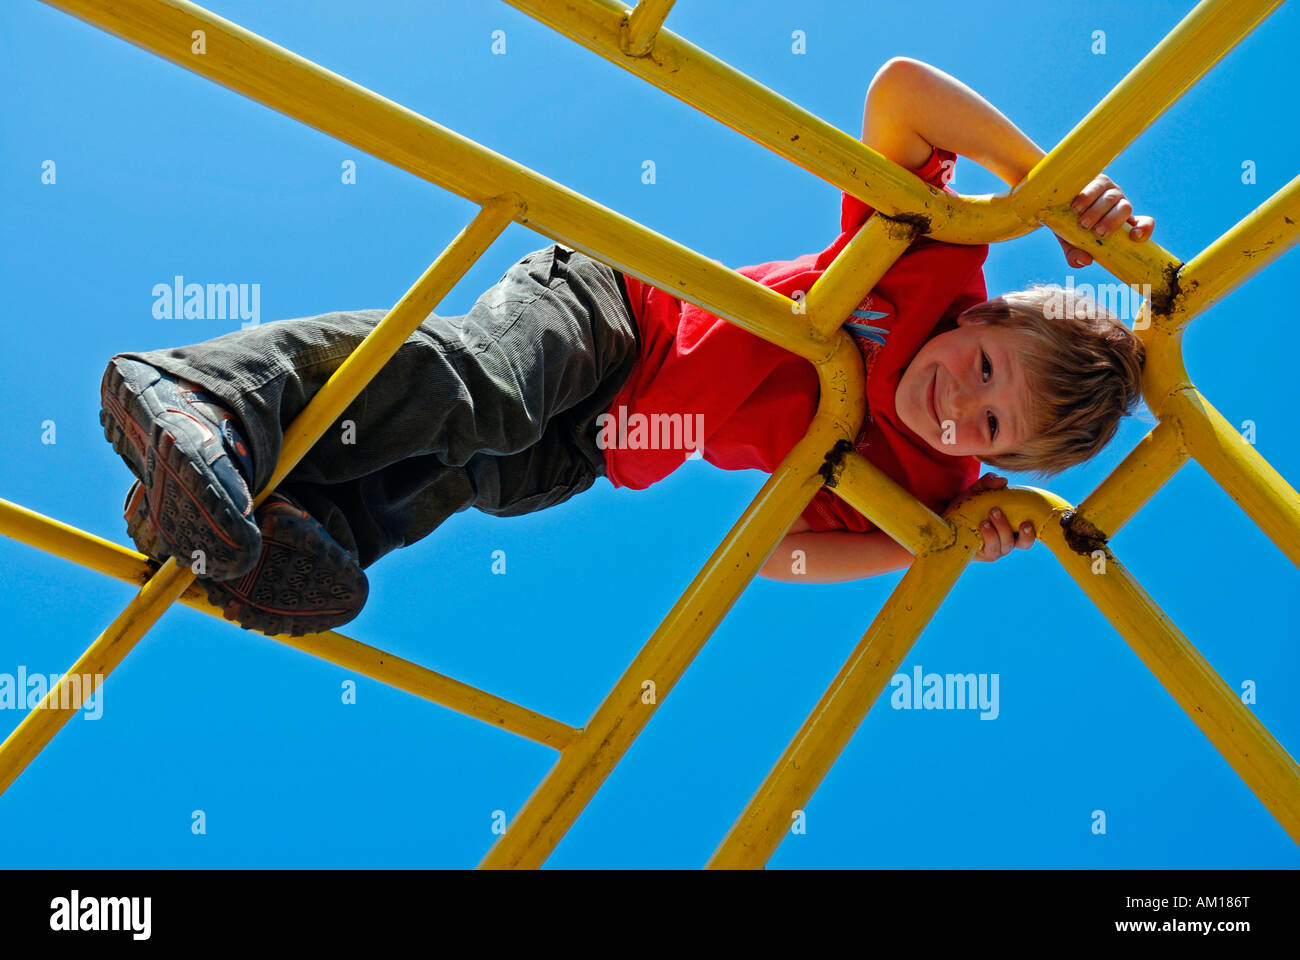 Boy, 7 years old, climbing on a jungle gym, Cologne, North Rhine-Westphalia, Germany Stock Photo